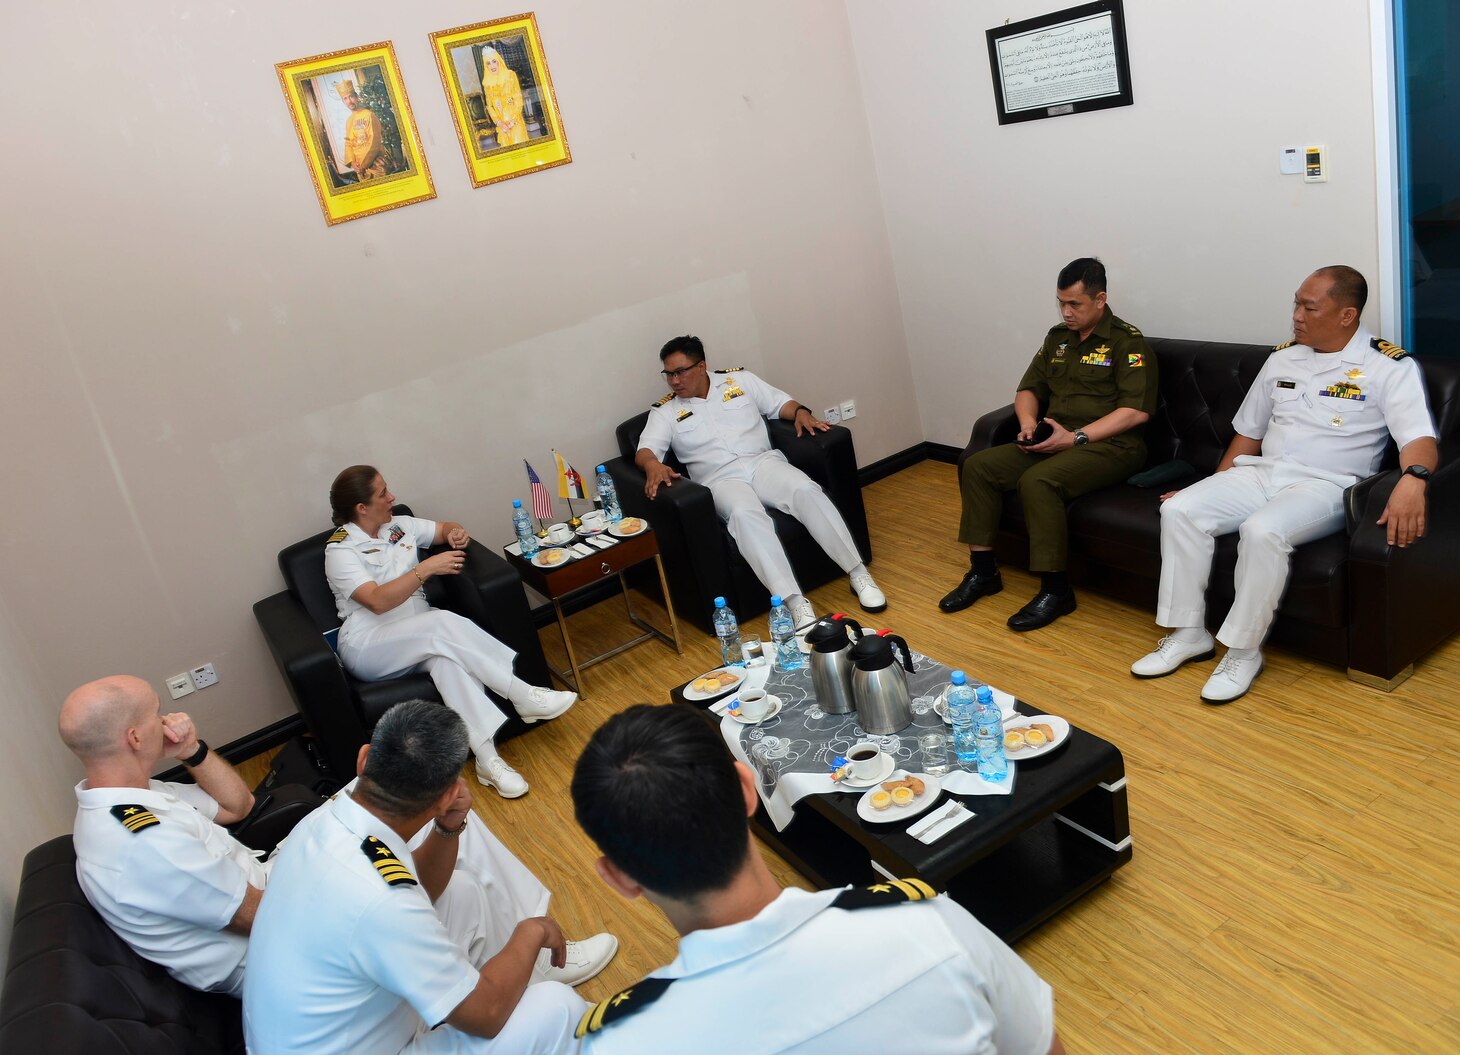 MUARA NAVAL BASE, Brunei (Nov. 12, 2018) - Capt. Ann McCann, deputy commodore of Destroyer Squadron 7, meets with Capt. Yusuf Masron, Royal Brunei Navy Acting Joint Force Commander, before the opening ceremony for Cooperation Afloat Readiness and Training (CARAT) Brunei 2018. During the meeting, the two leaders talked about the opportunity to enhance interoperability between the U.S. and Royal Brunei Navies during this year's exercise. CARAT Brunei 2018 marks the 24th iteration of the maritime exercise series and reflects the growing relationship between the U.S. and Royal Brunei Navy to further expand bilateral and multilateral exercises in cooperatively ensuring maritime security, stability and prosperity.